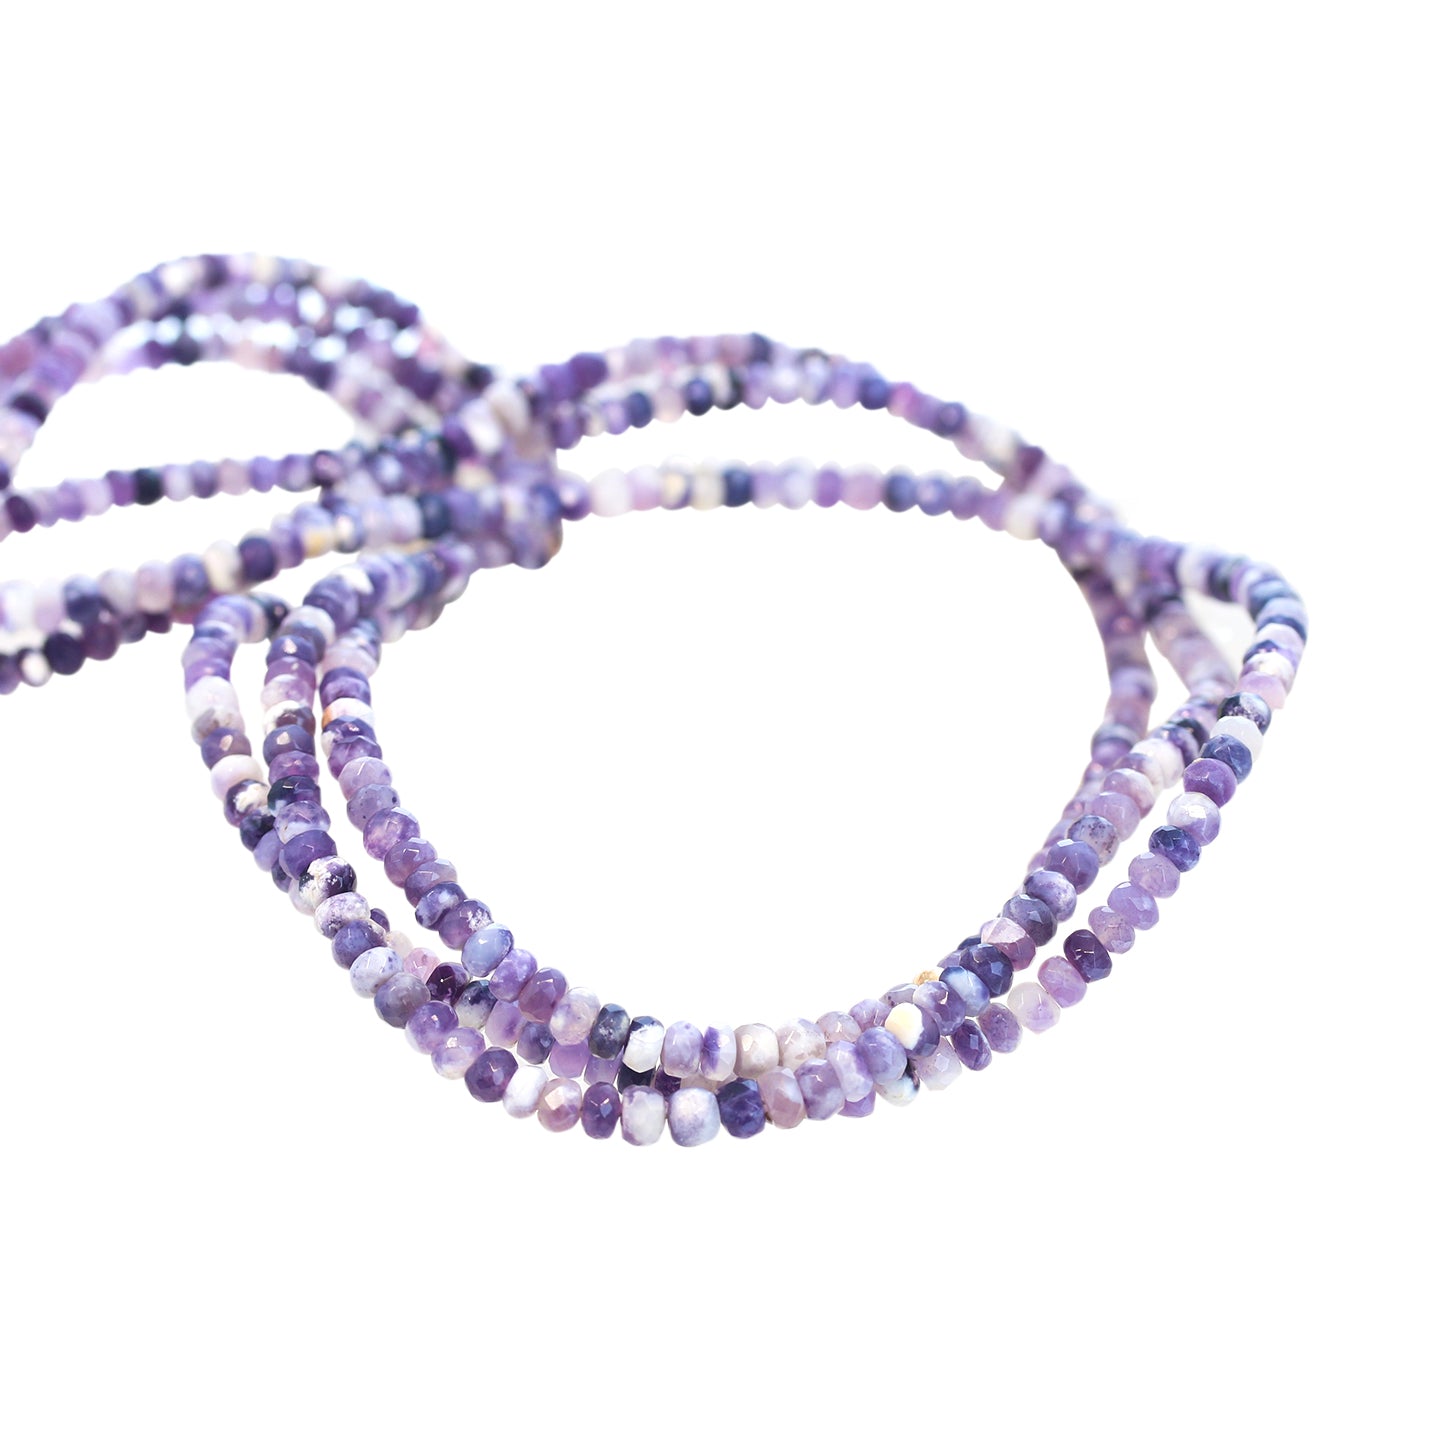 Mexican Opal Beads Rondelles Purple Faceted 4mm -NewWorldGems